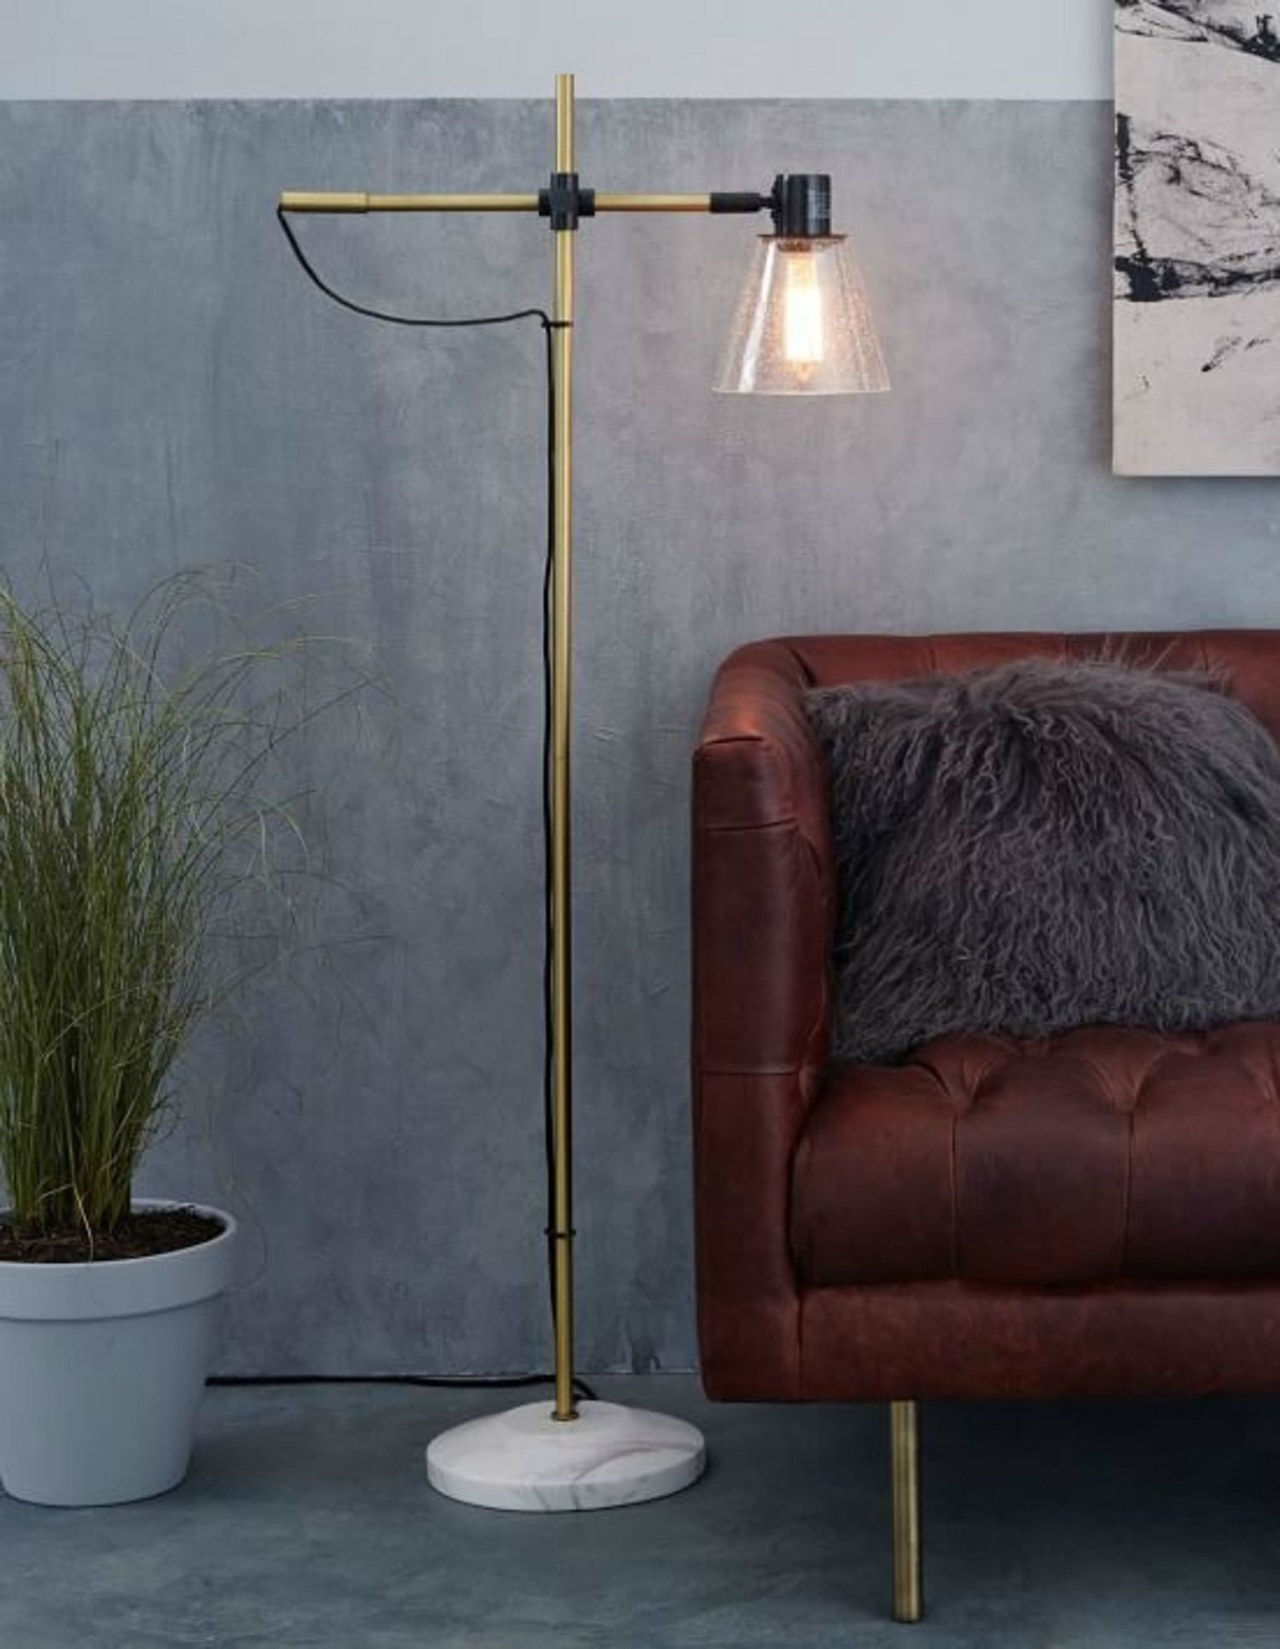 08 ceiling lights table lamps floor lamp 0222 courtesy vendor